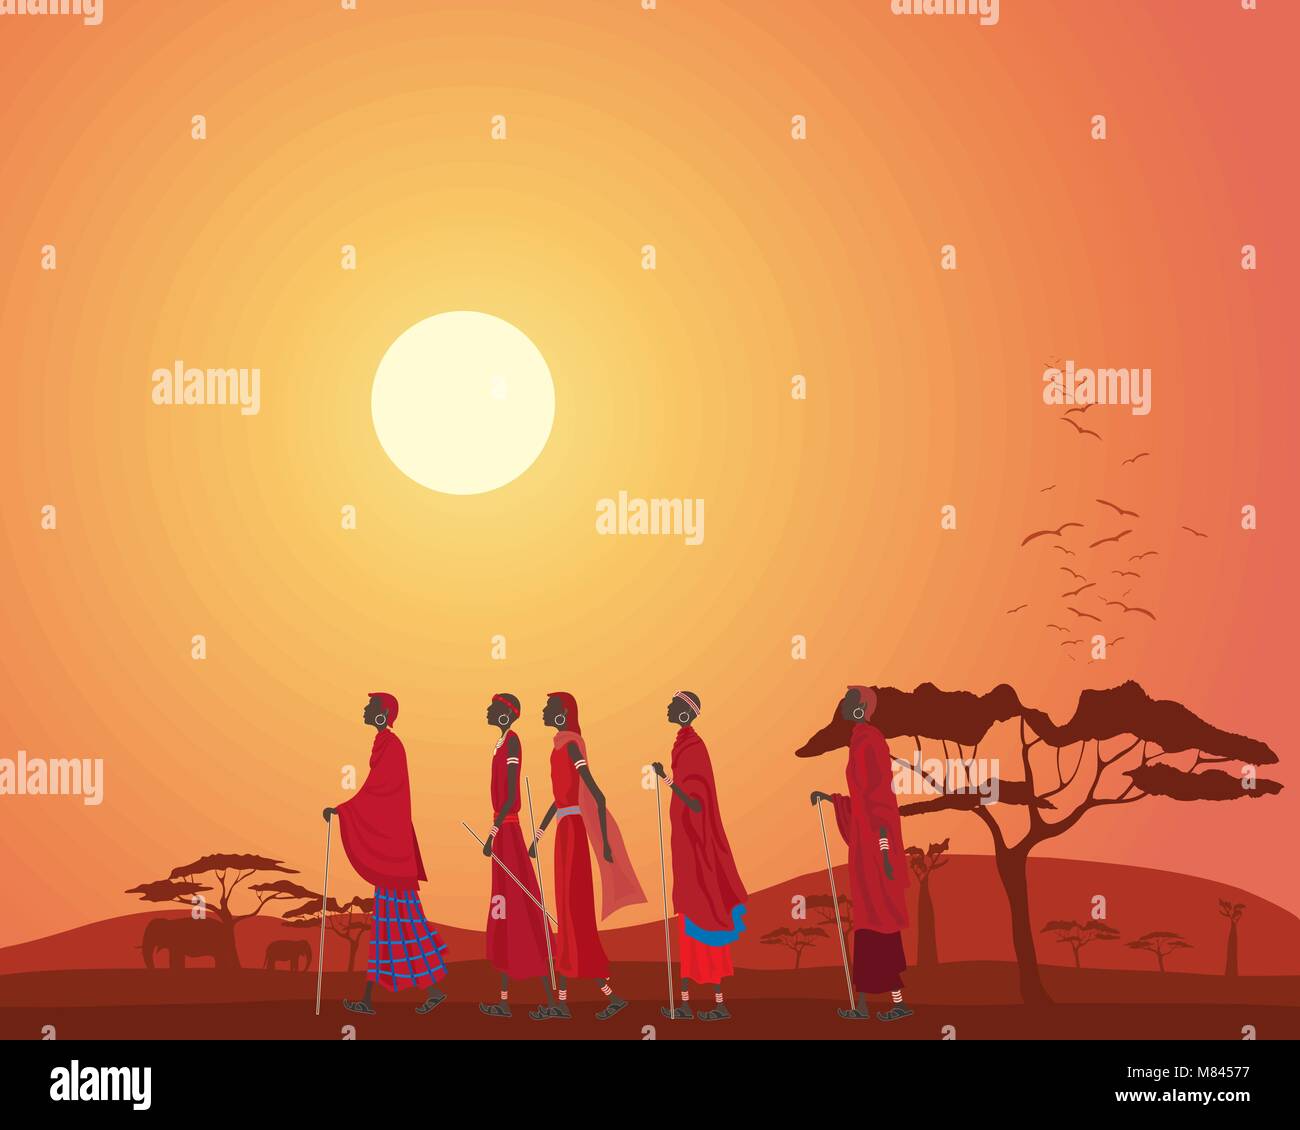 a vector illustration in eps 10 format of African Masai men walking across the plains at sunset in kenya Stock Vector